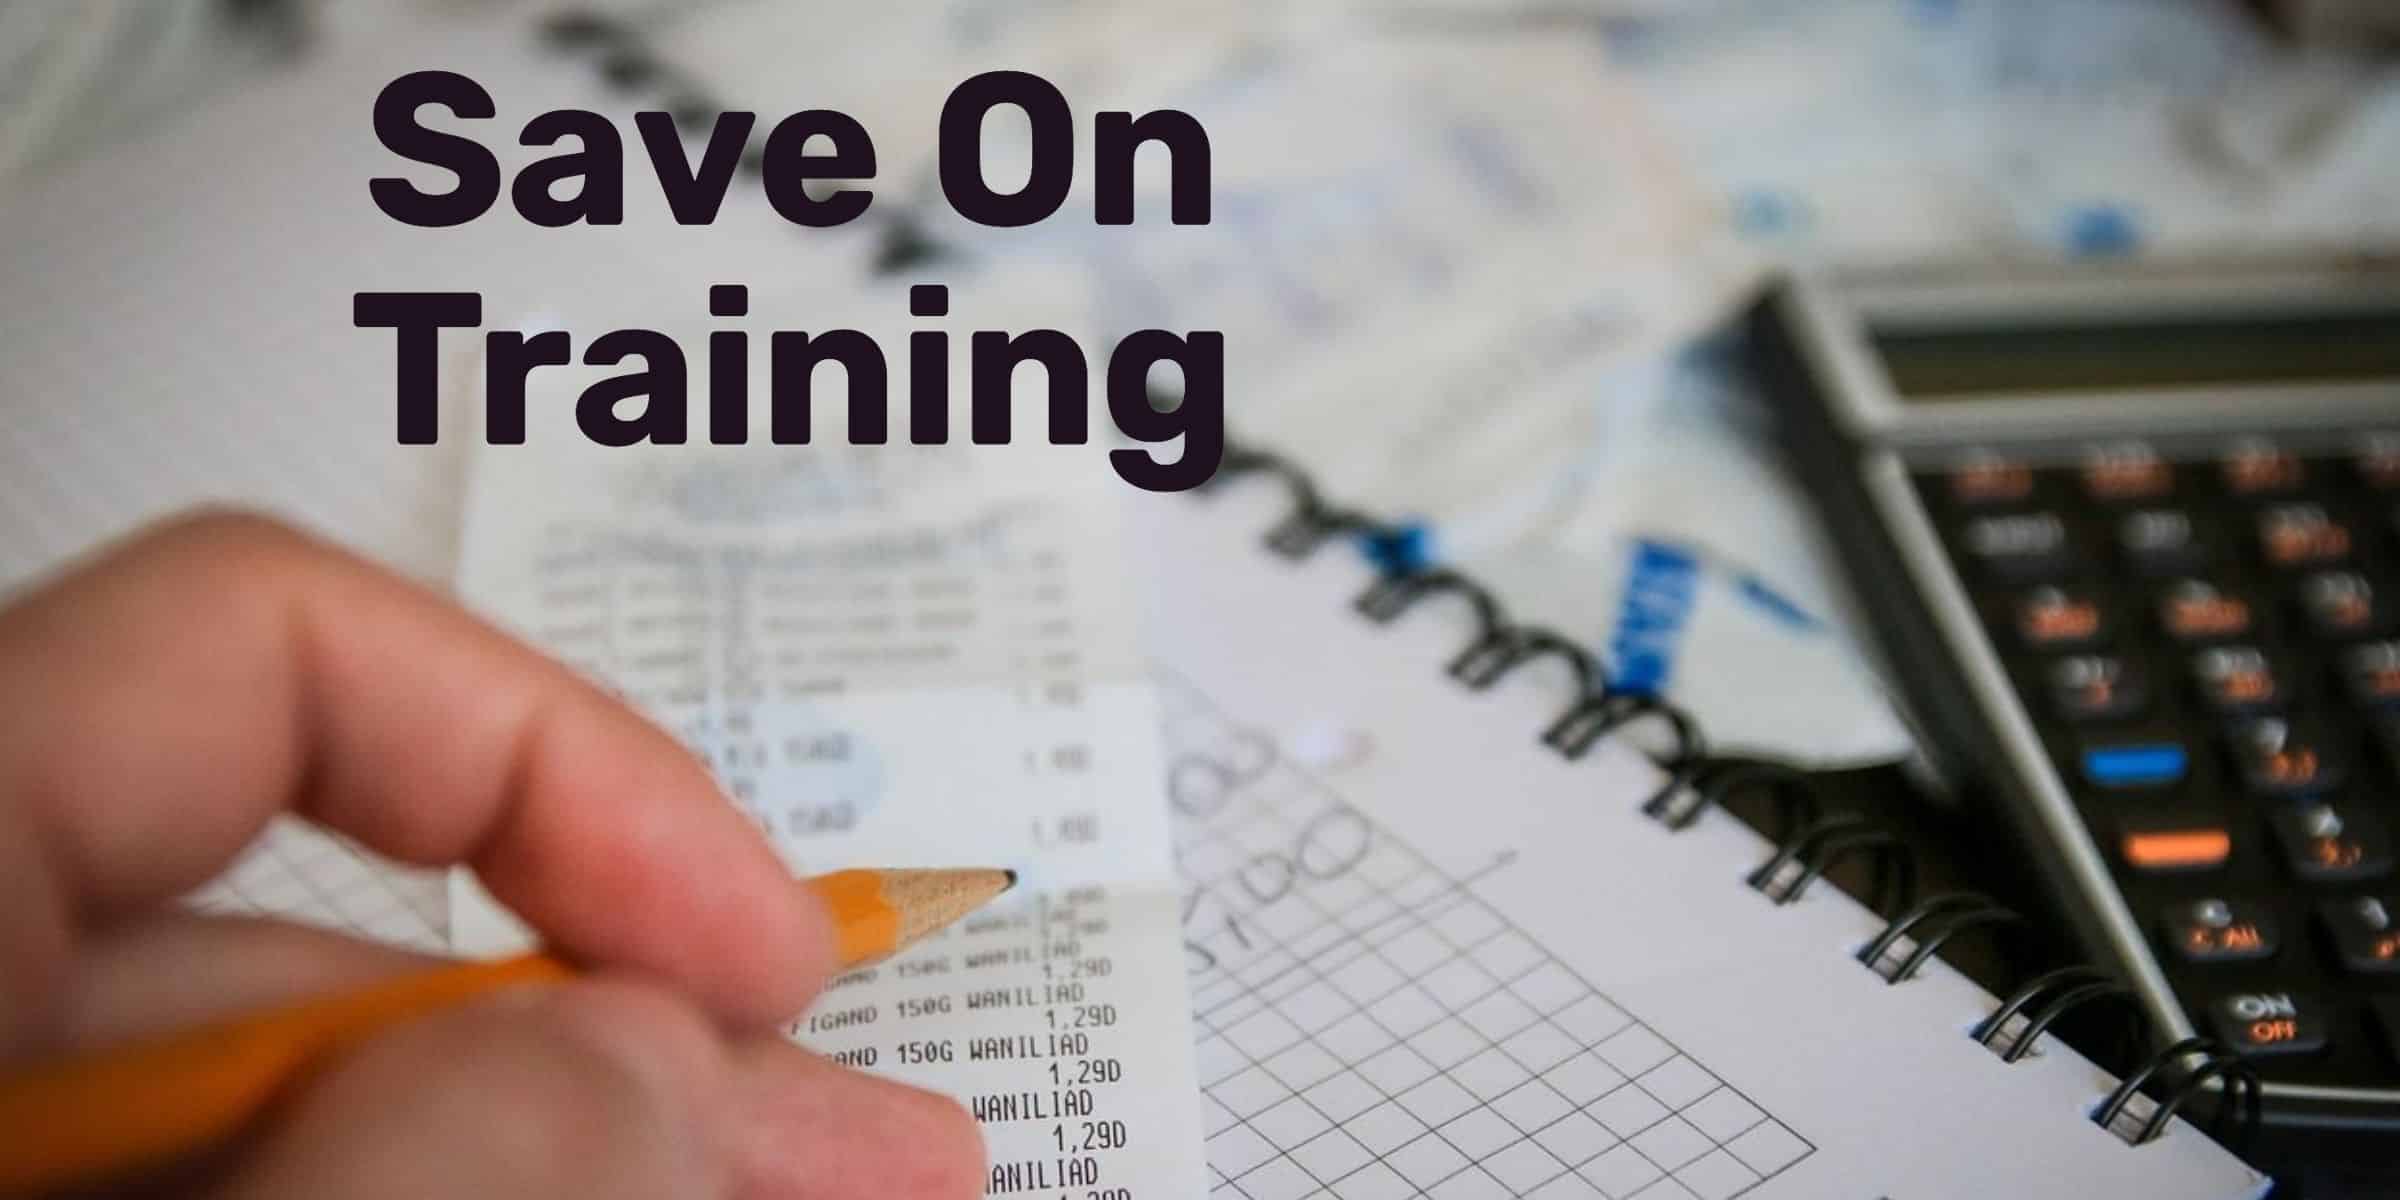 Hand holding a pencil over a receipt with a calculator and notebook underneath it all with overlaid text "Save On Training."